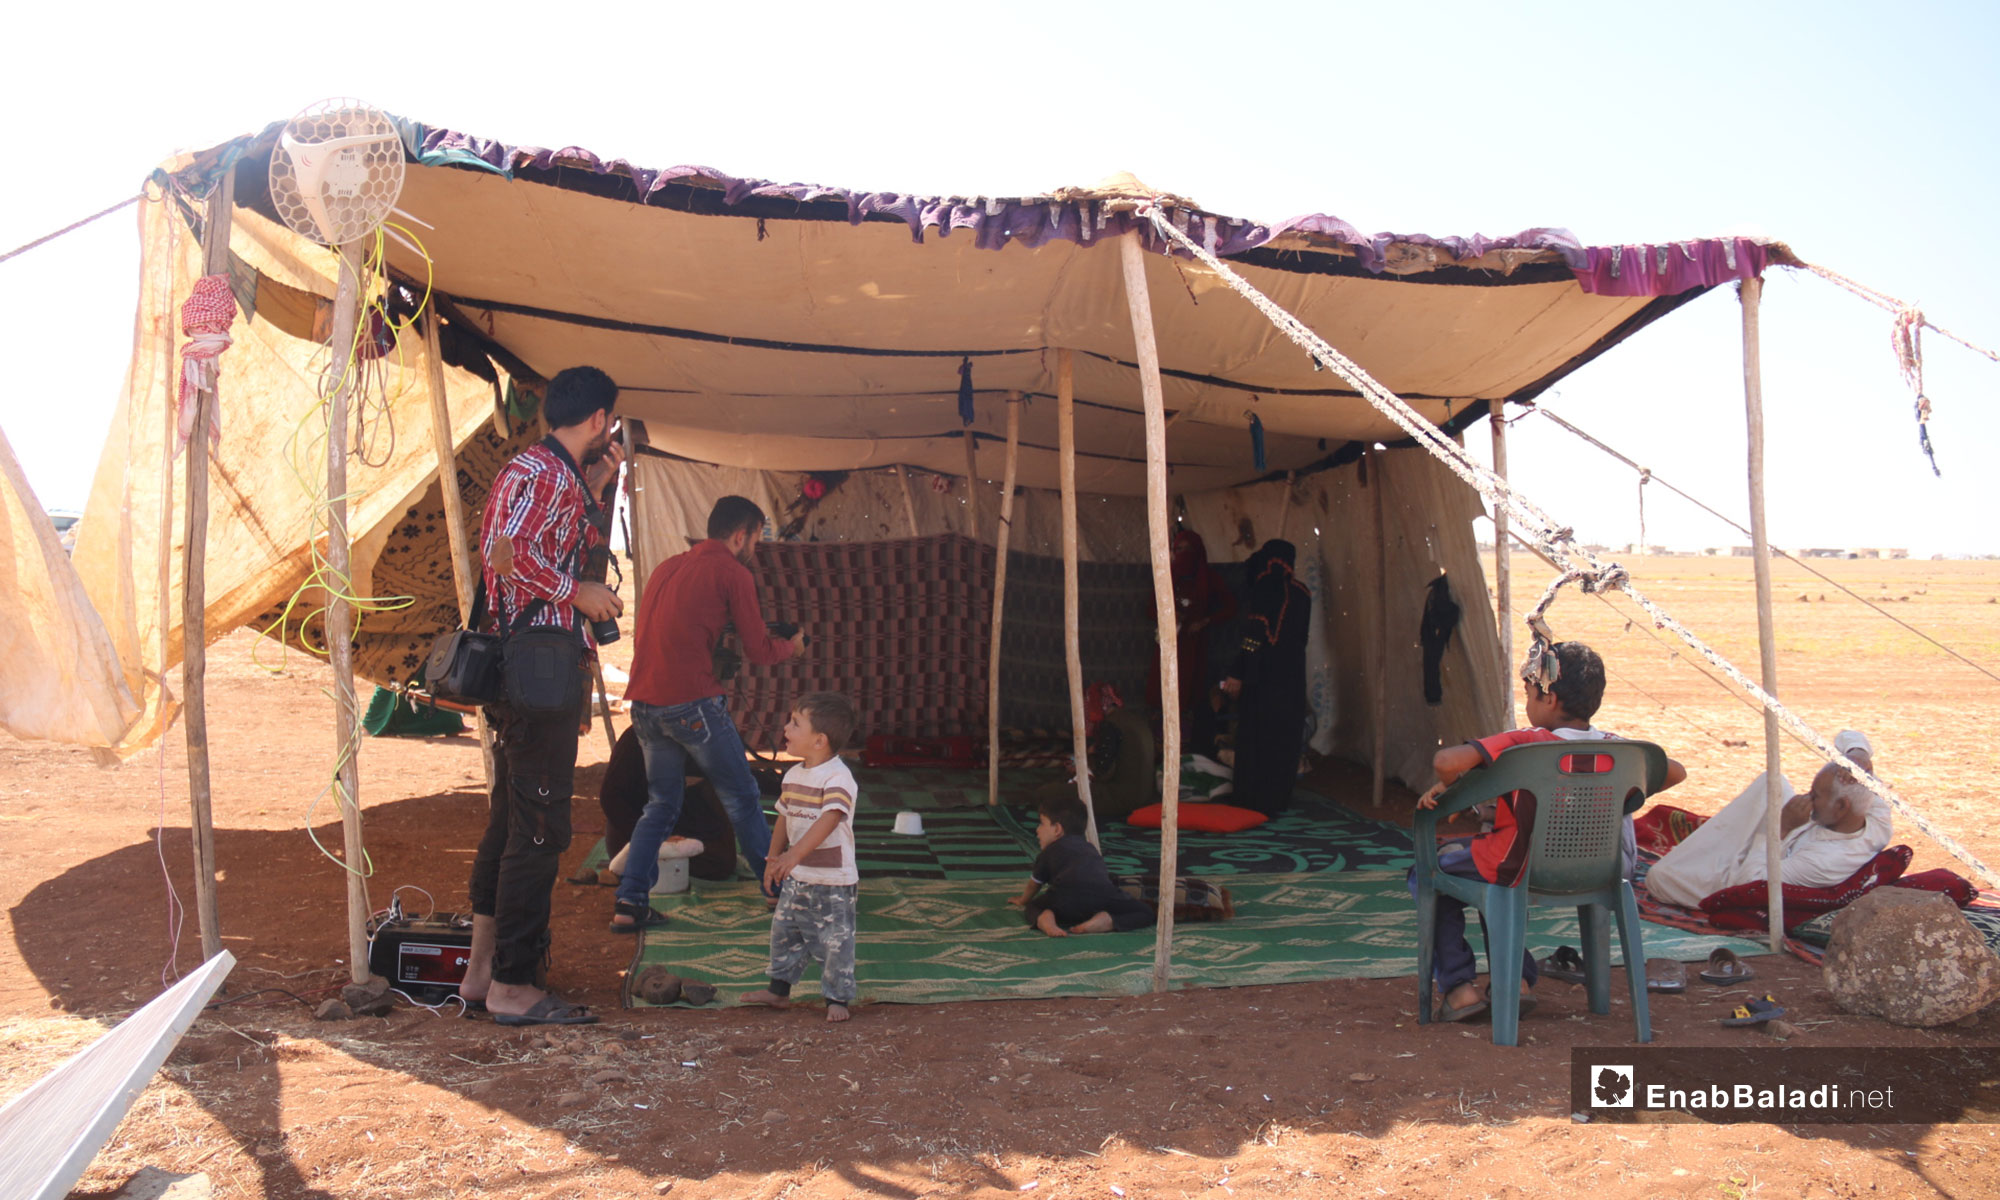 Families displaced from rural Idlib due to shelling to the town of Sarman near the Turkish supervision point in Idlib – September 12, 2018 (Enab Baladi)